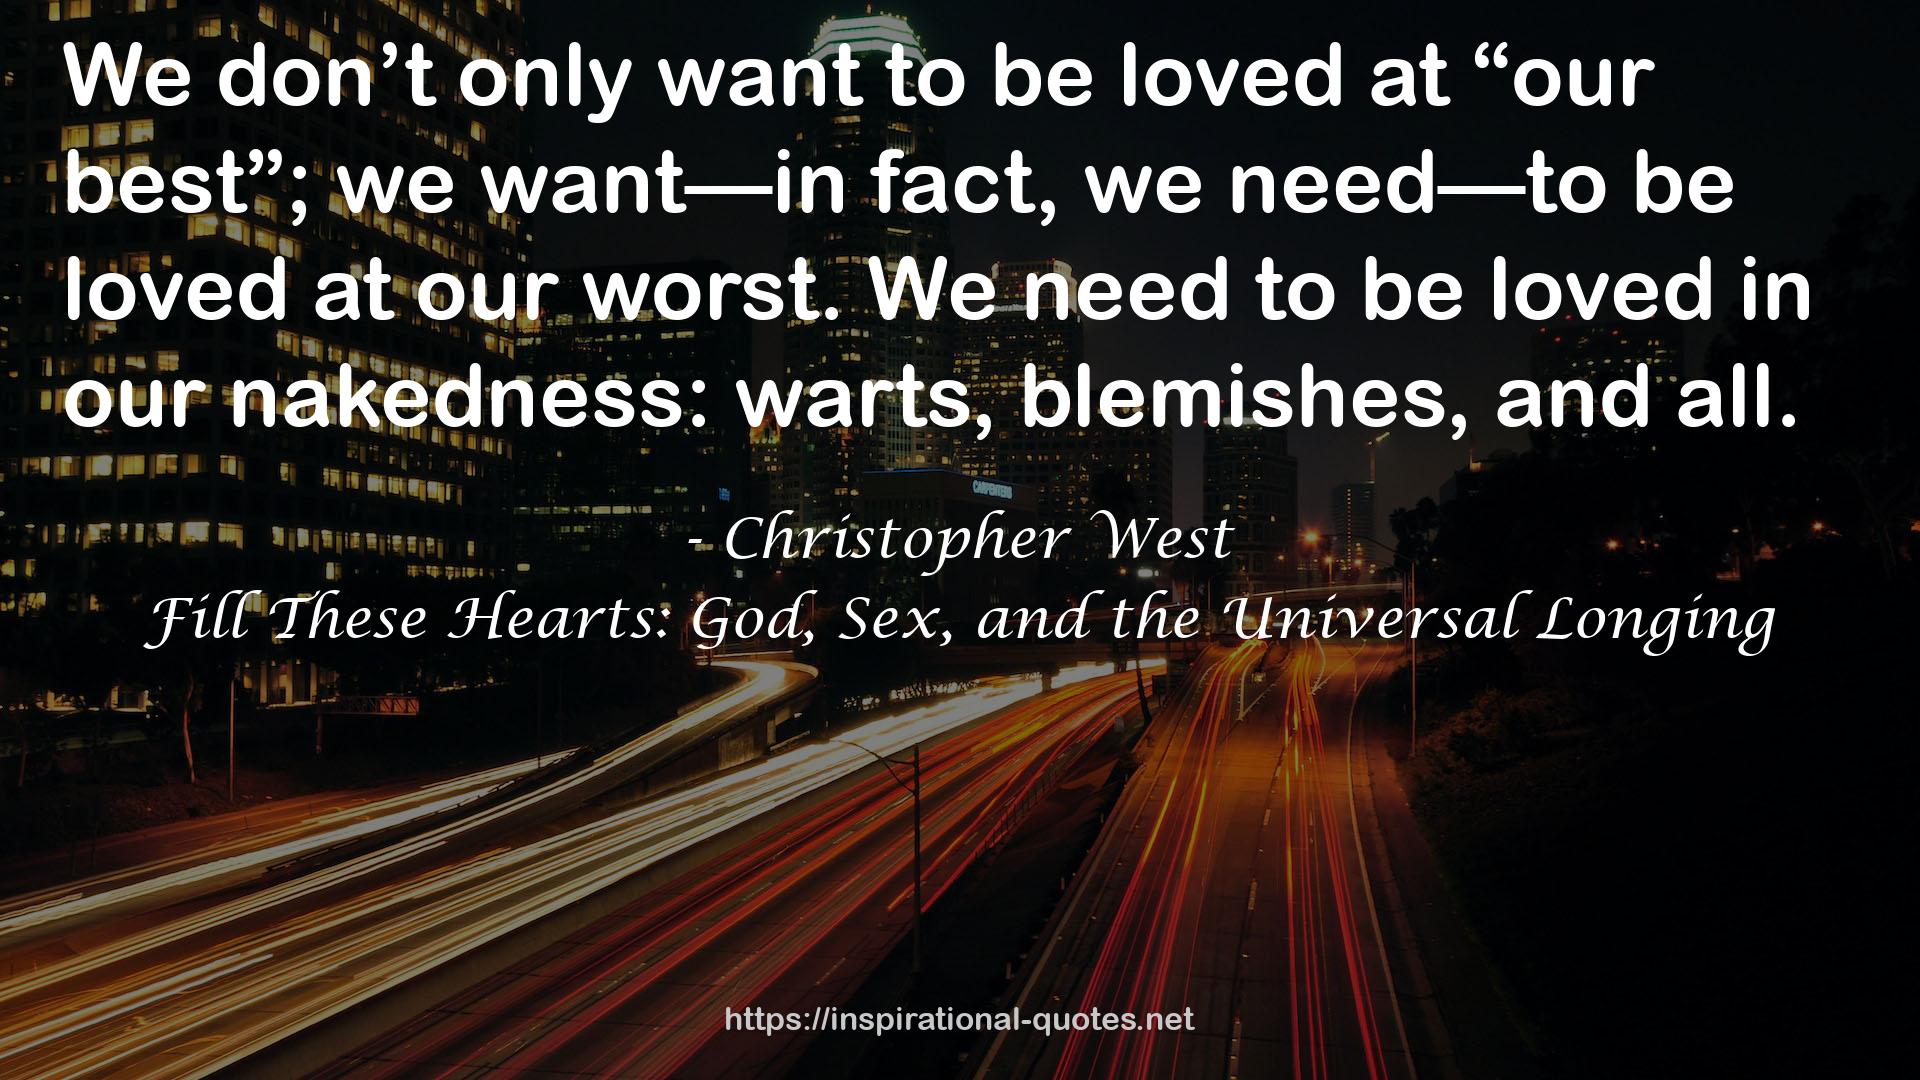 Fill These Hearts: God, Sex, and the Universal Longing QUOTES